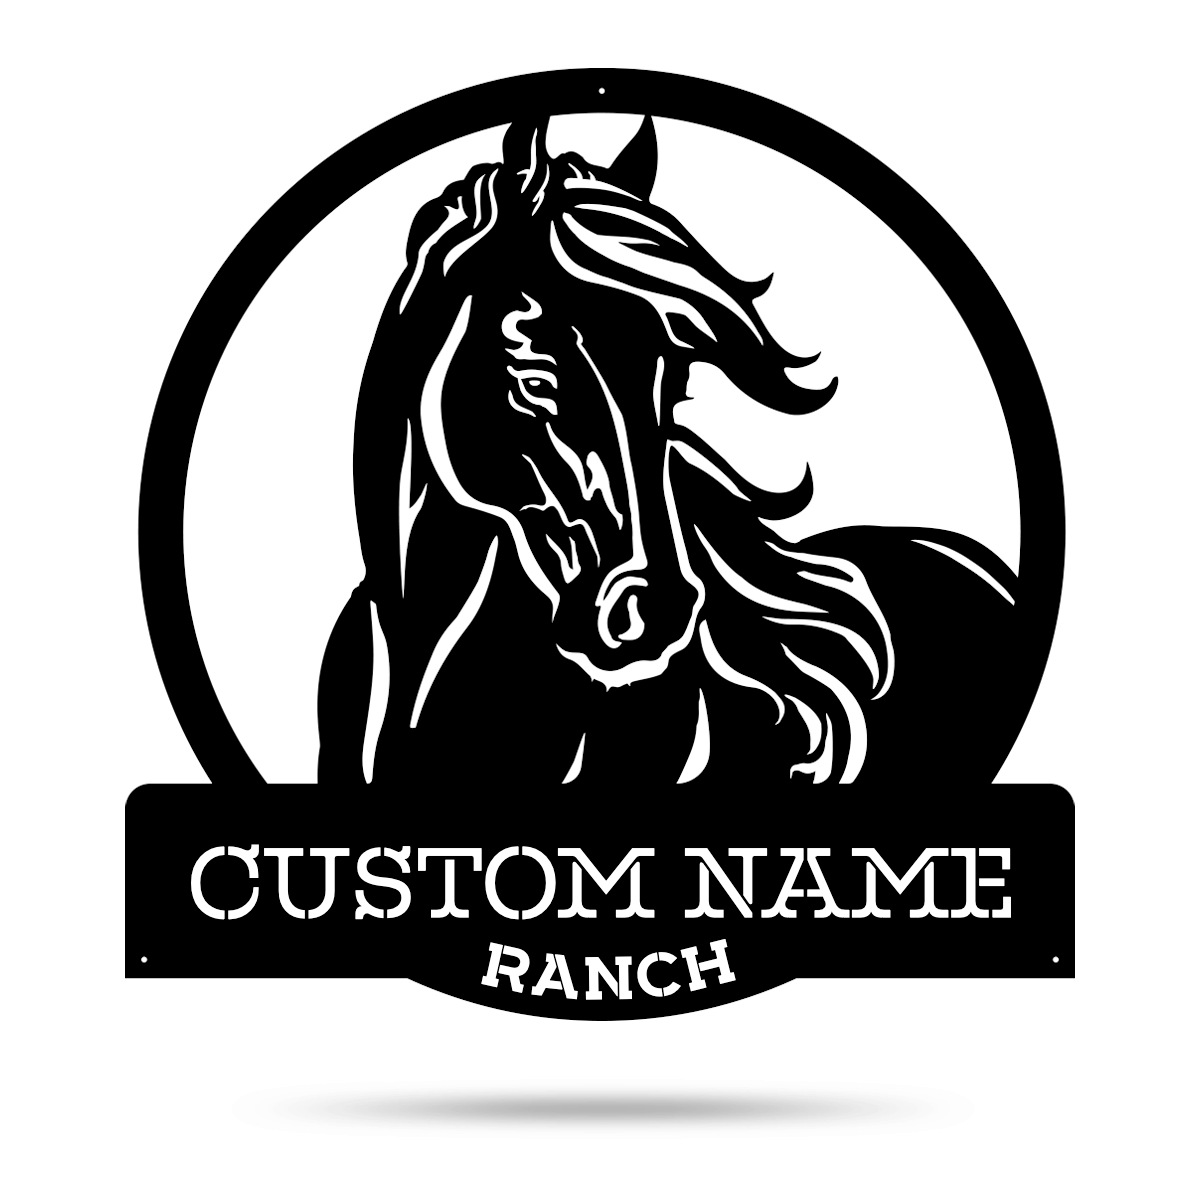 Personalized Horse Ranch Sign - Black - 24x24